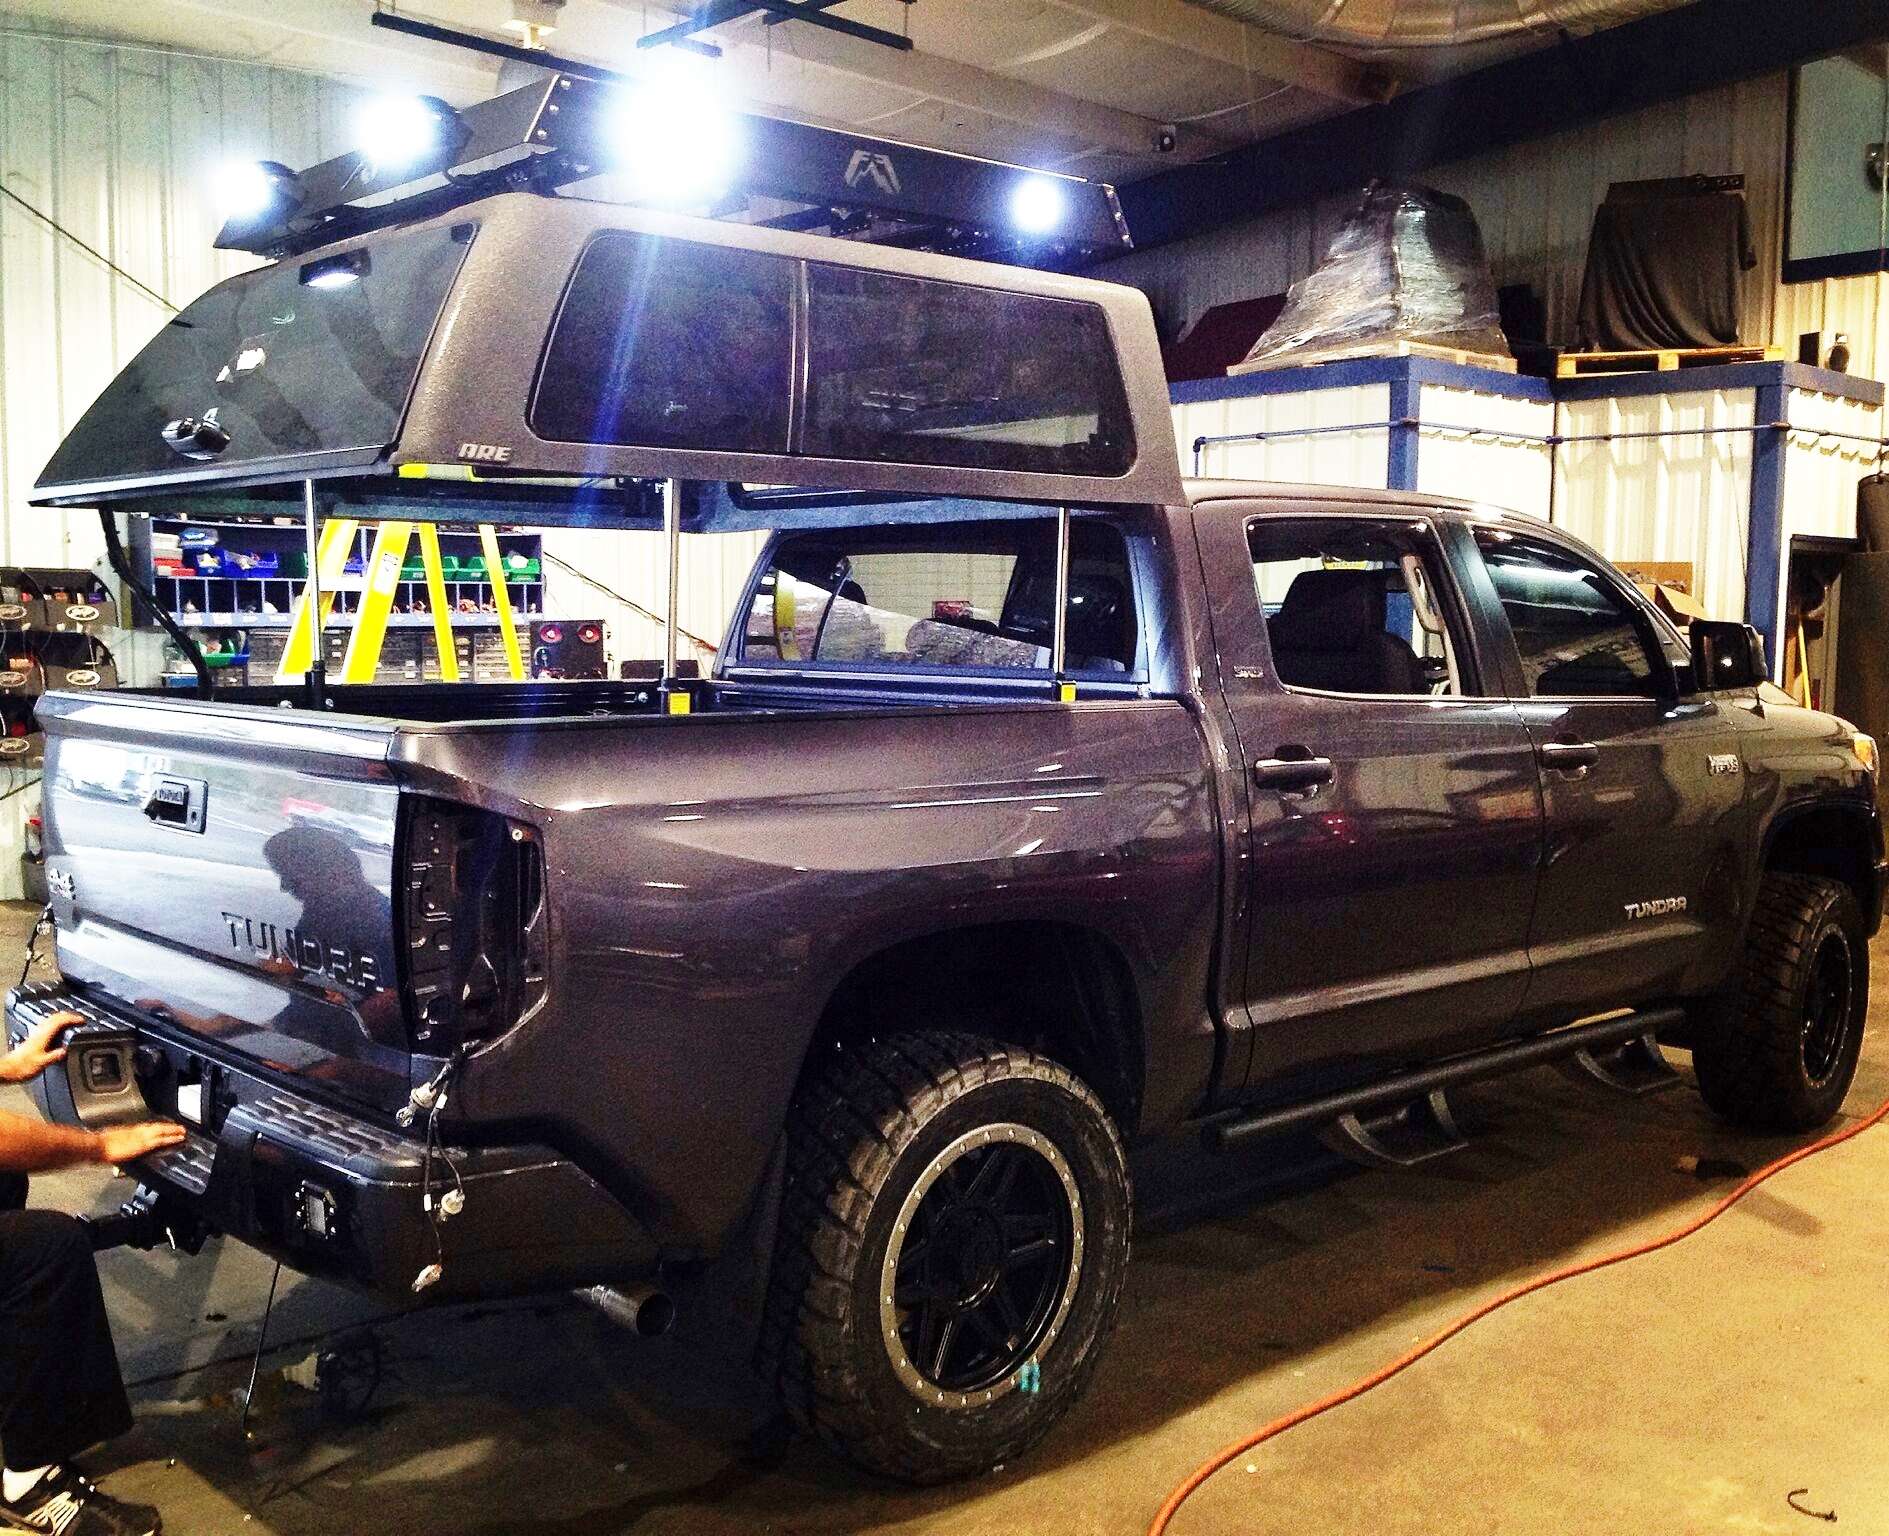 Toppers arenât simple fiberglass shells anymore. Now they feature custom LED lighting, soundproofing, hydraulic lifts and sturdy roof racks for carrying spare rods and other gear.